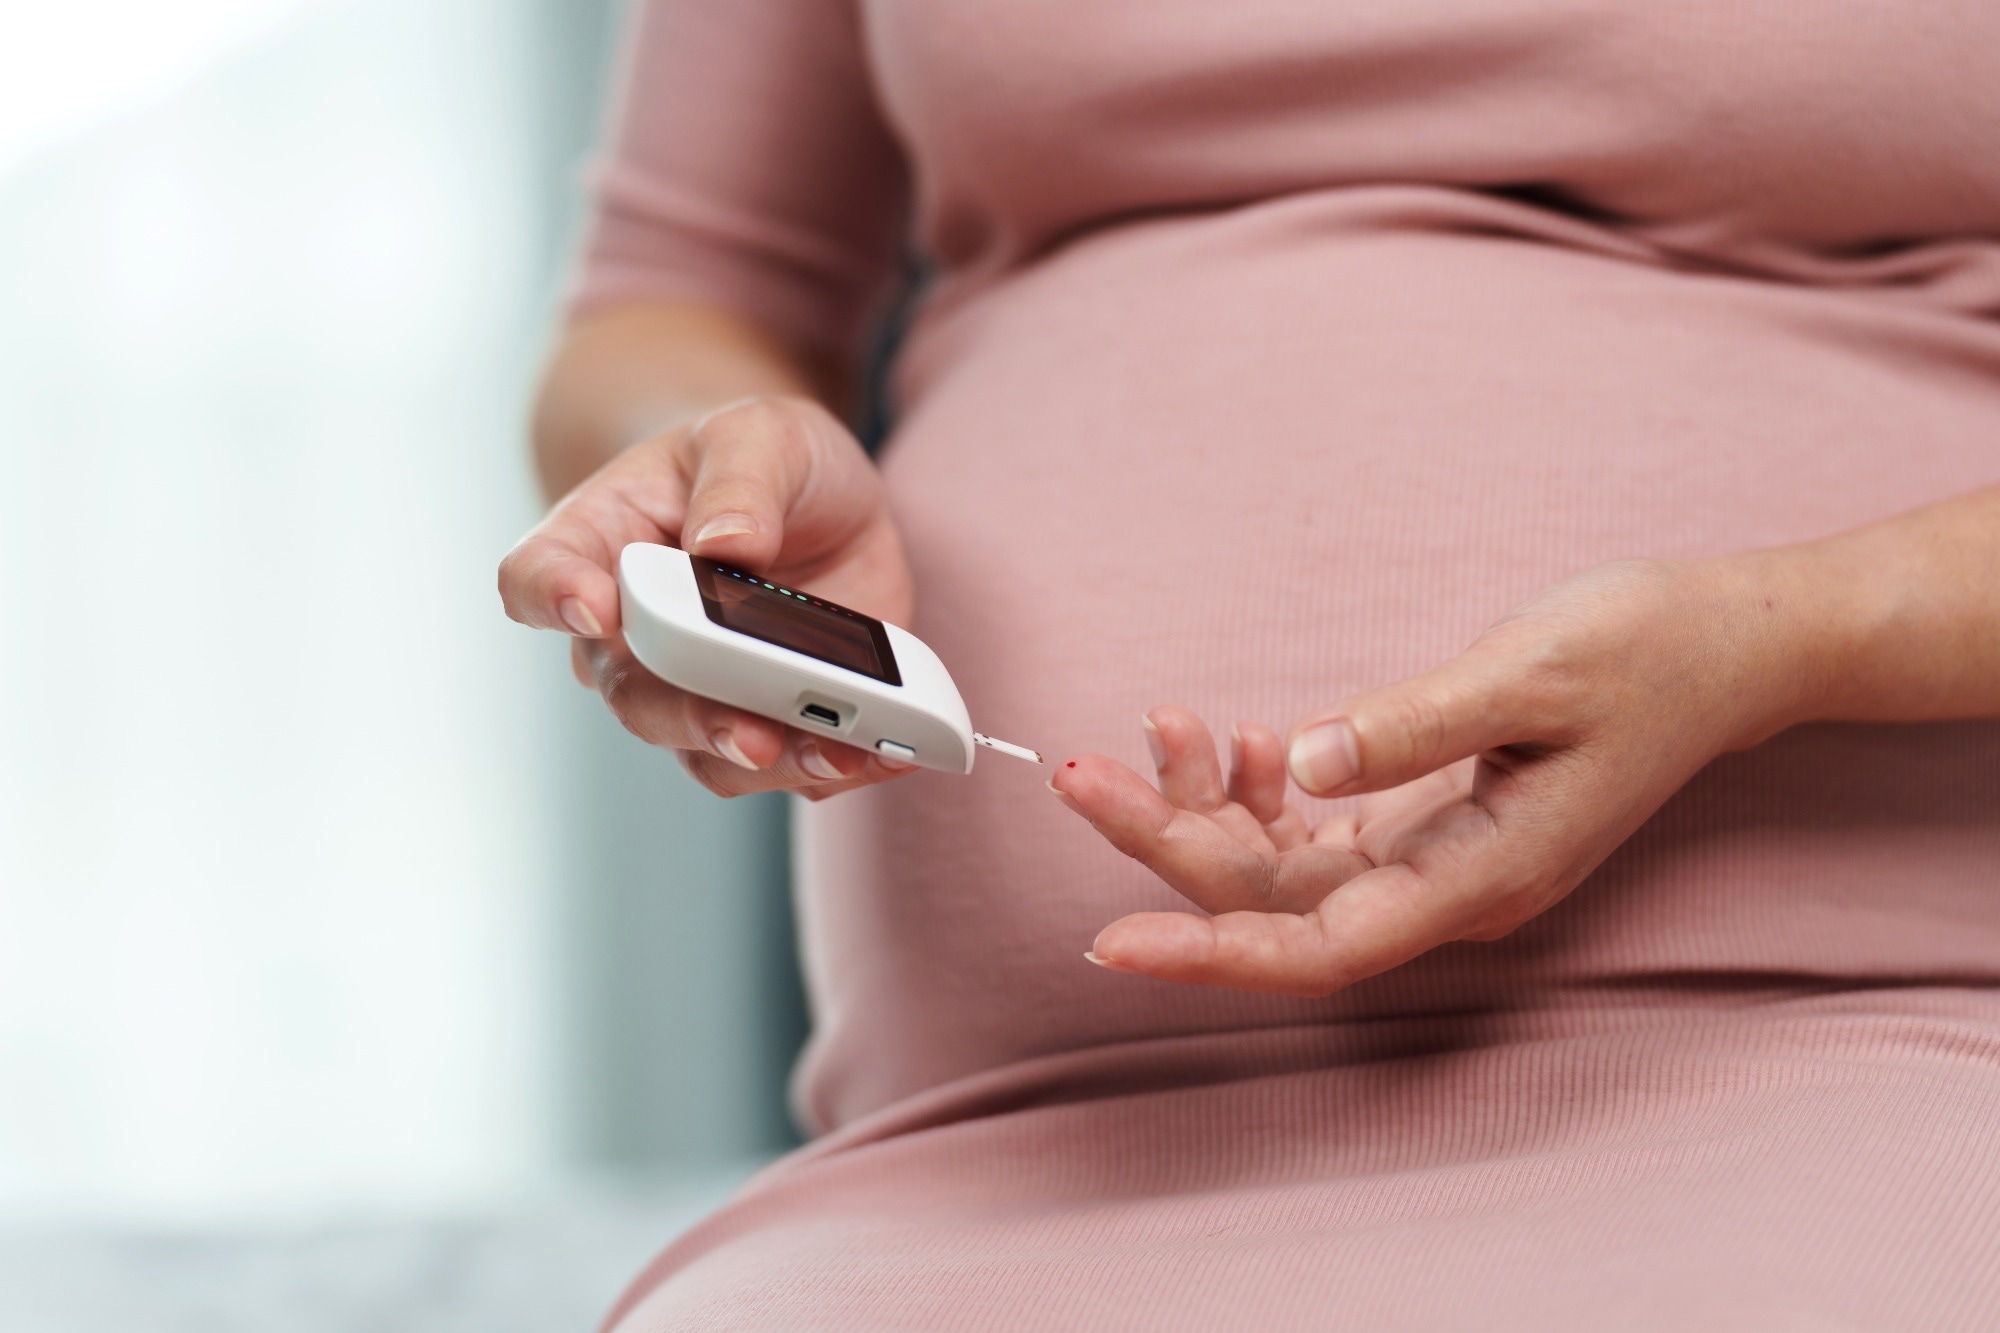 Study highlights nutrition therapy’s potential to manage gestational diabetes effectively